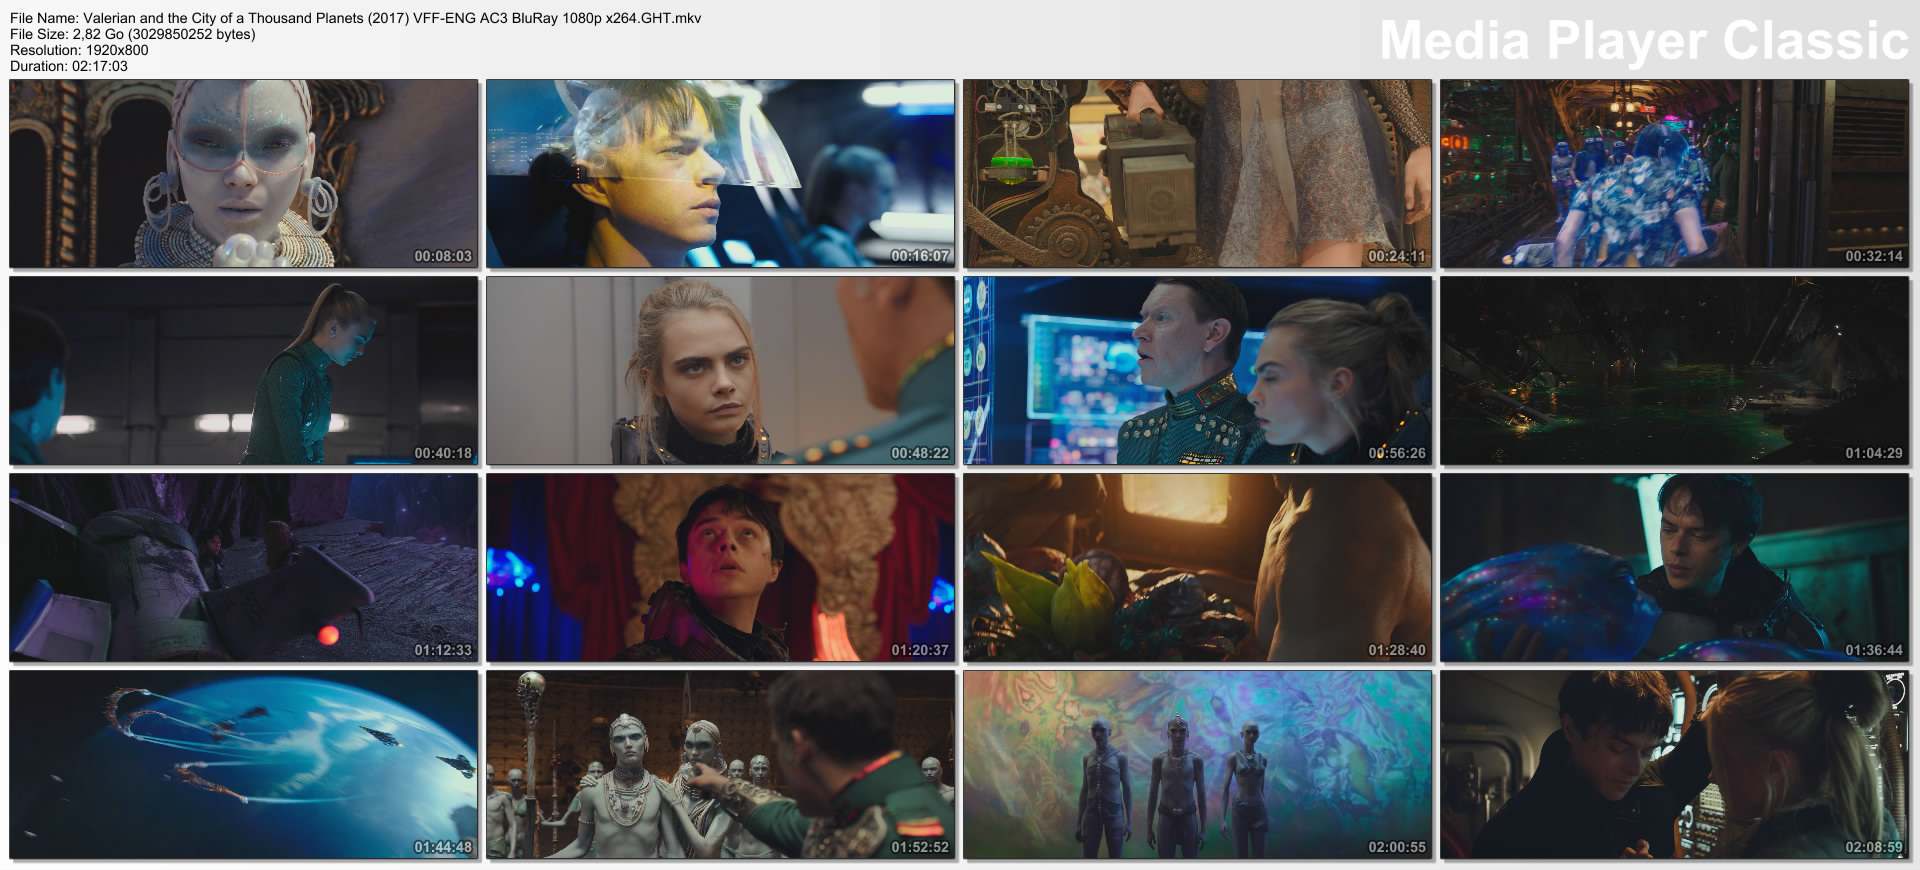 Valerian and the City of a Thousand Planets (2017) VFF-ENG AC3 BluRay 1080p x264.GHT